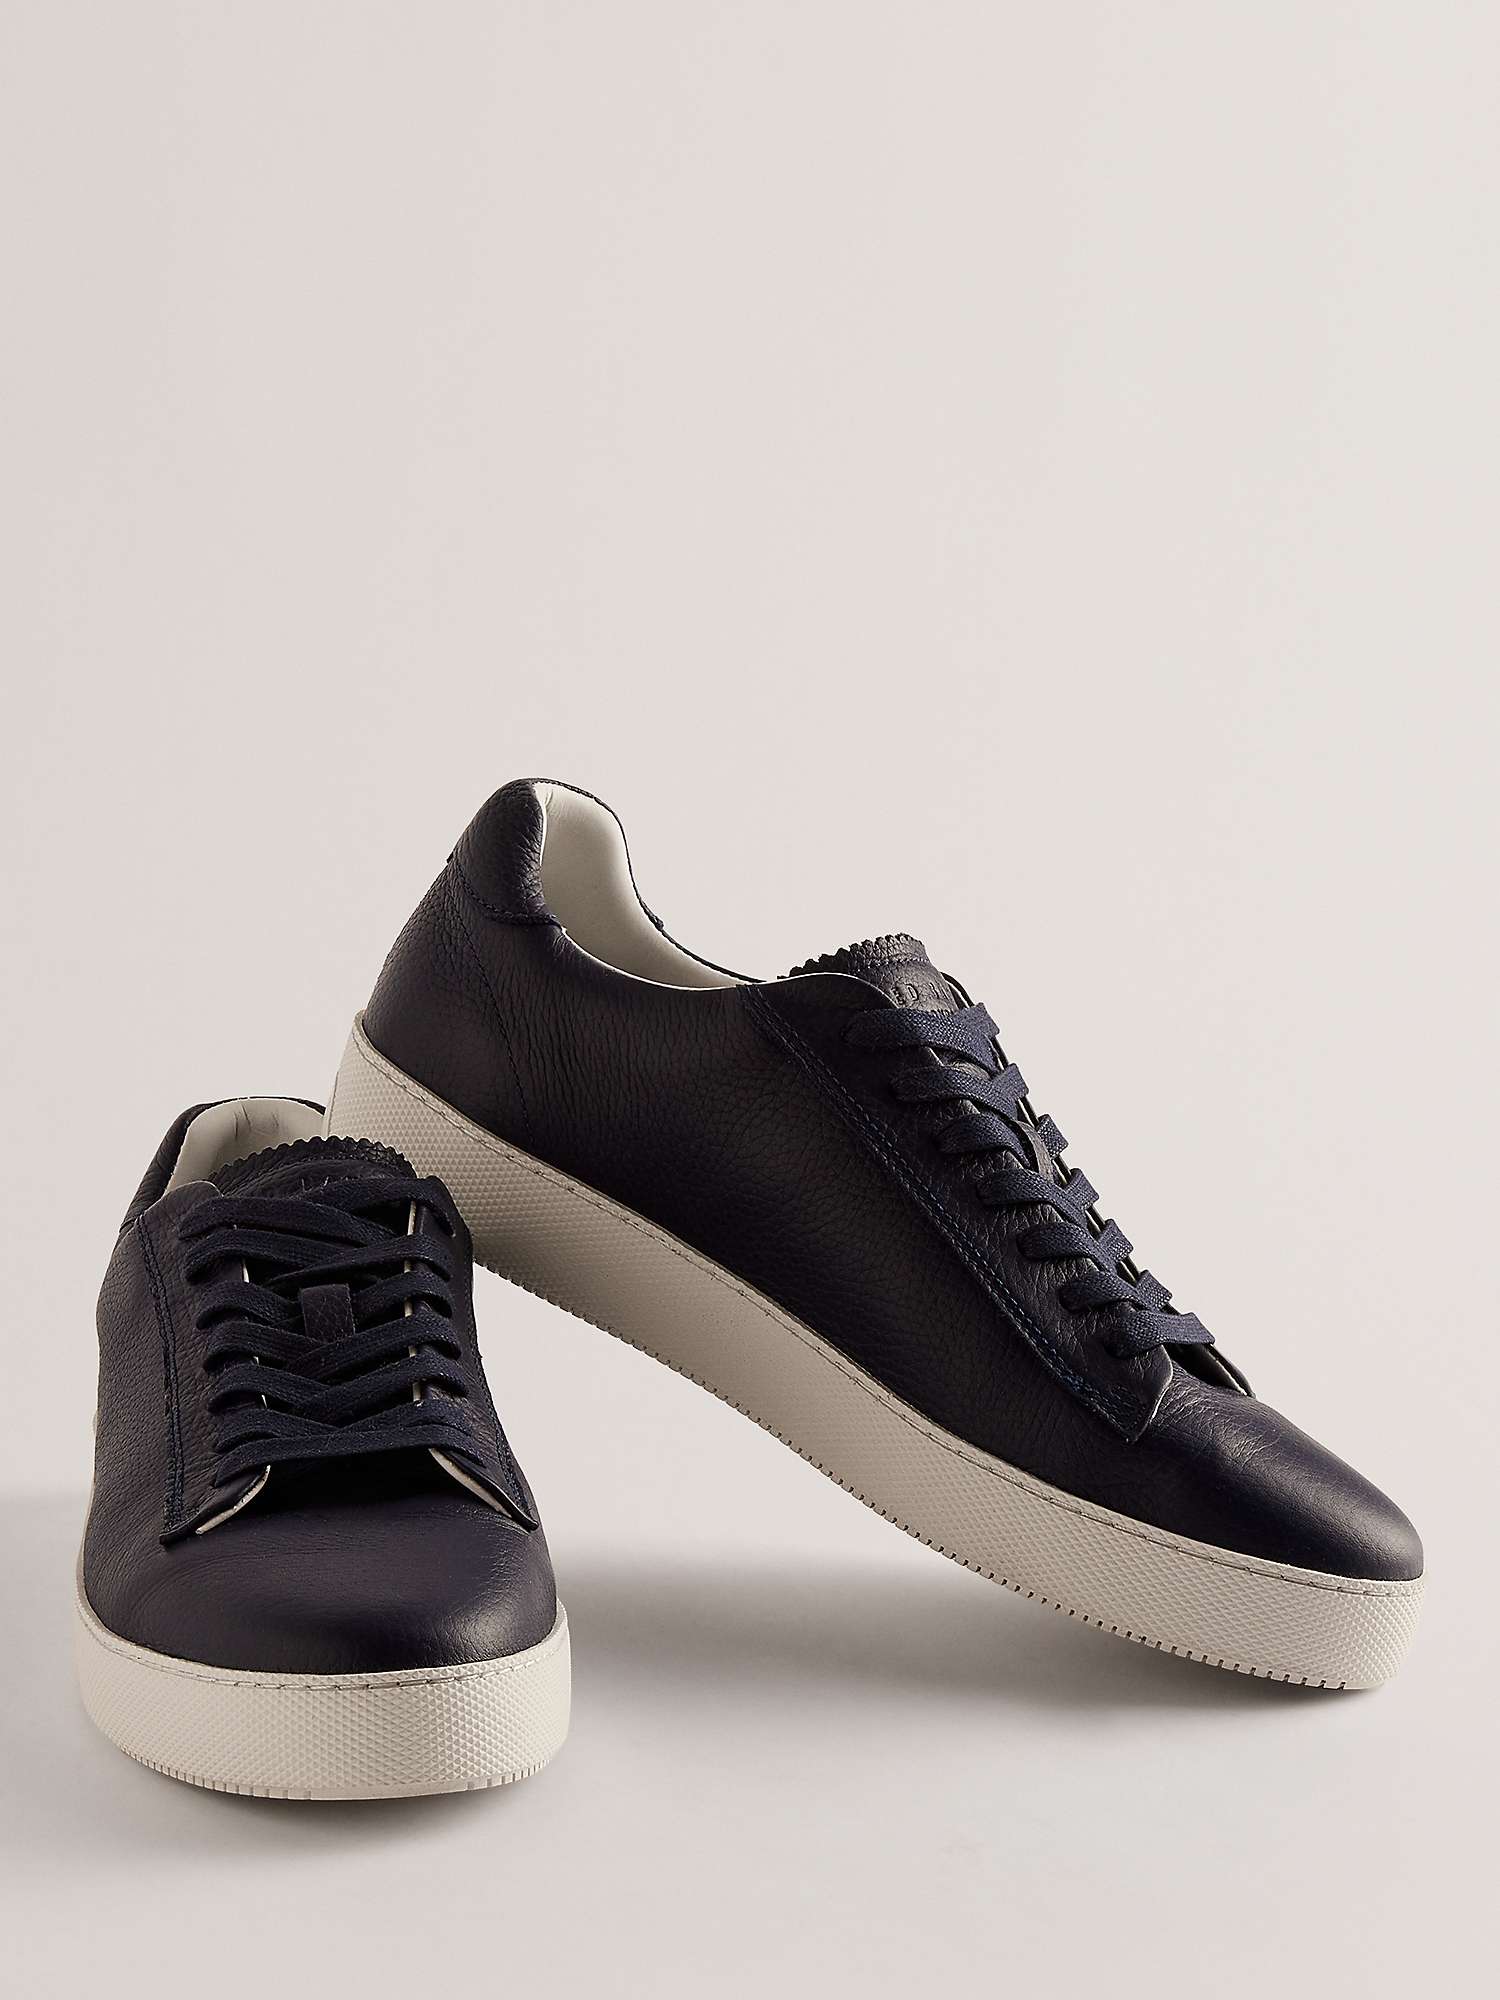 Ted Baker Leather Pebble Trainers, Navy at John Lewis & Partners